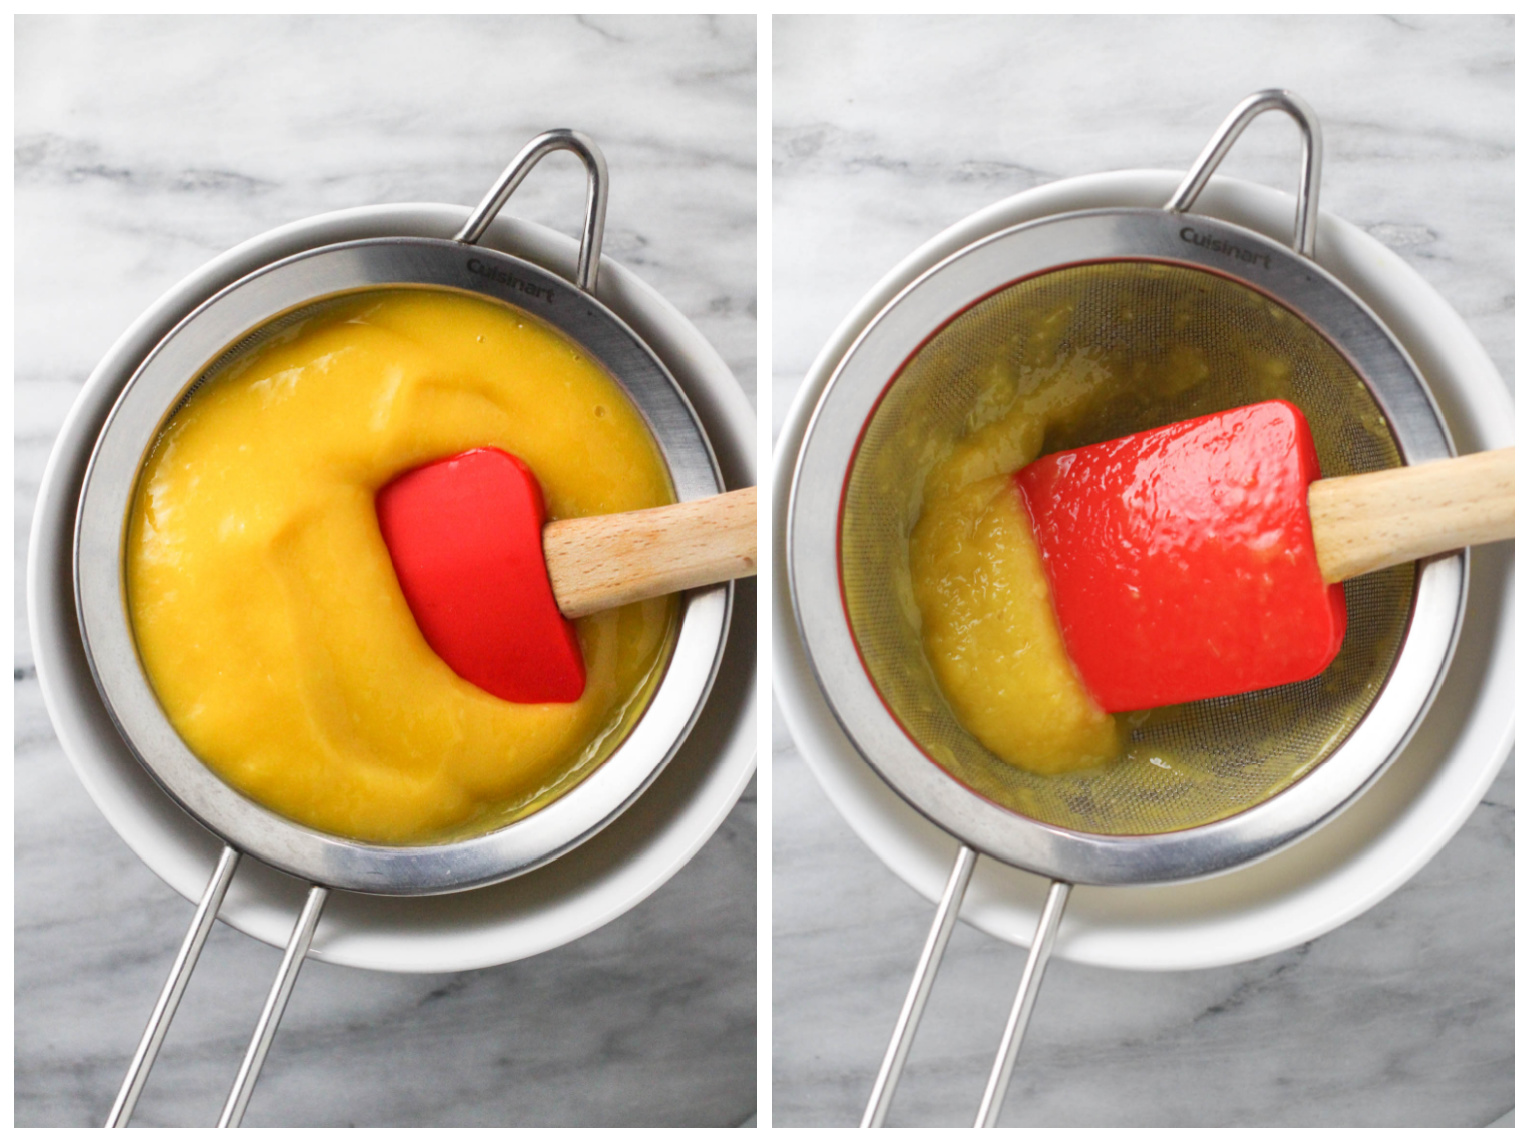 Tow side-by-side images. Image on the left, mango puree being puched through a mesh strainer. Image on the right, remaining mango pulp and a spatula in a mesh strainer.